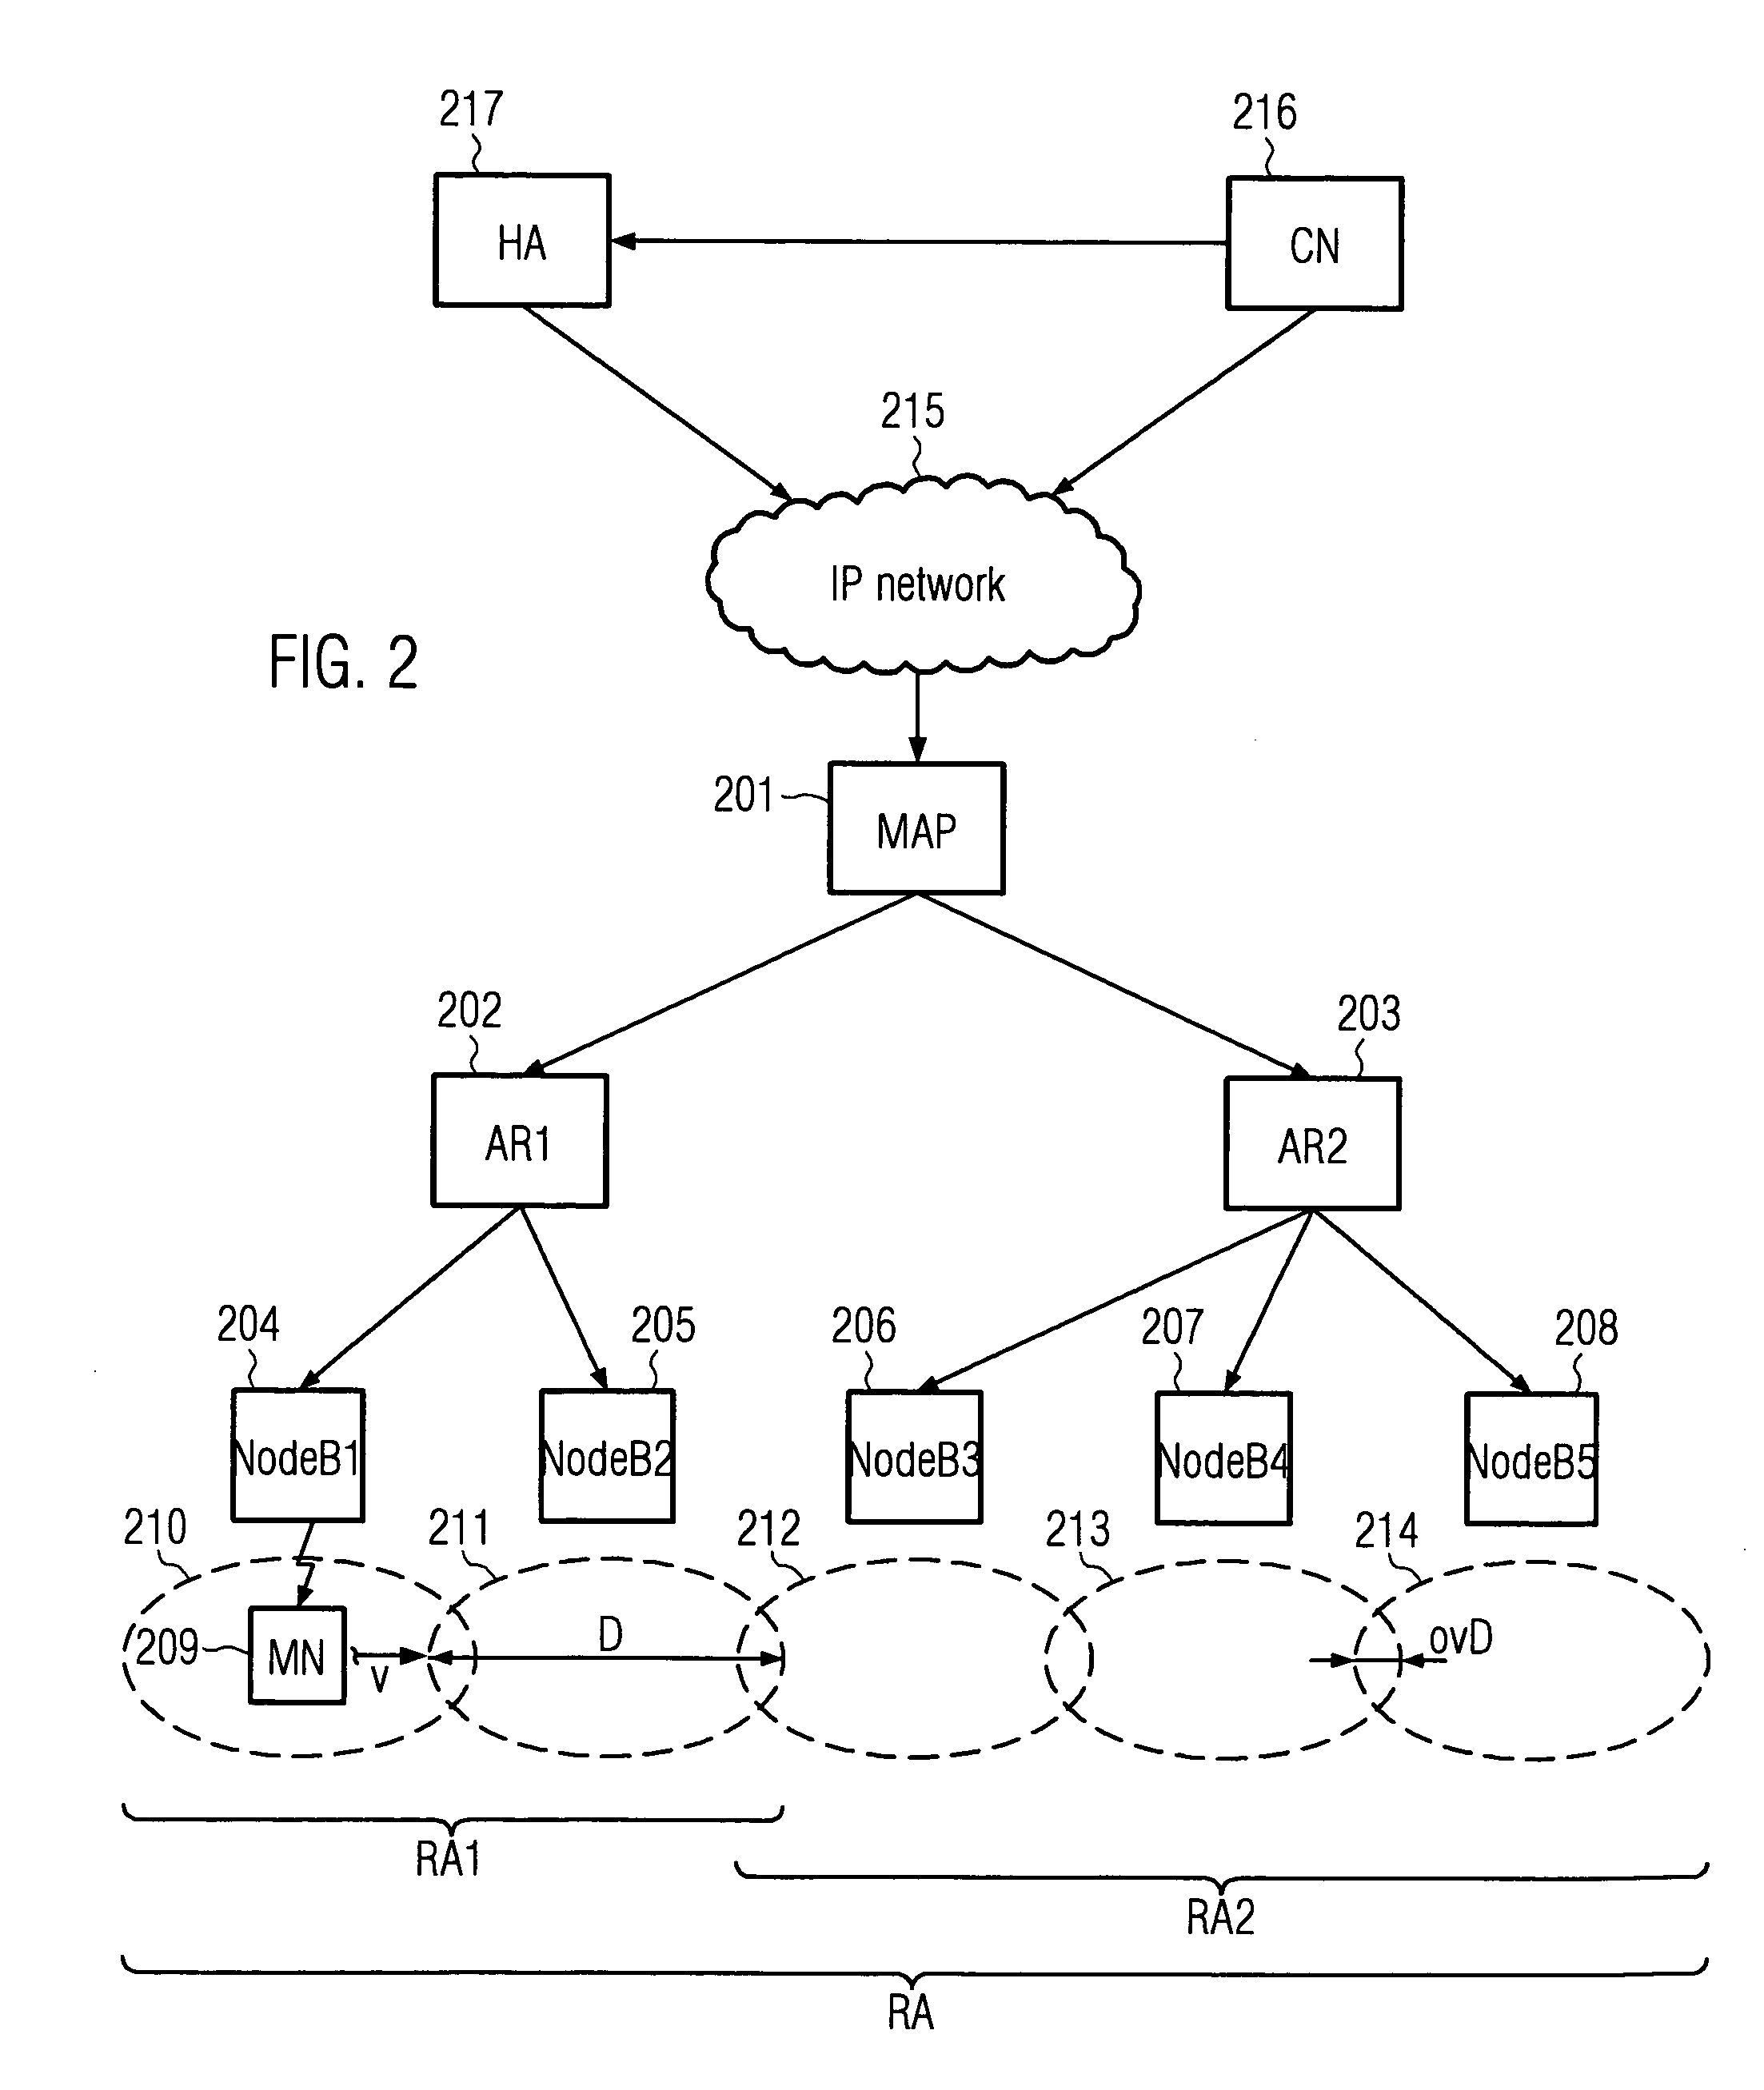 Seamless transmission of data to mobile nodes during fast handovers in a mobile communication system